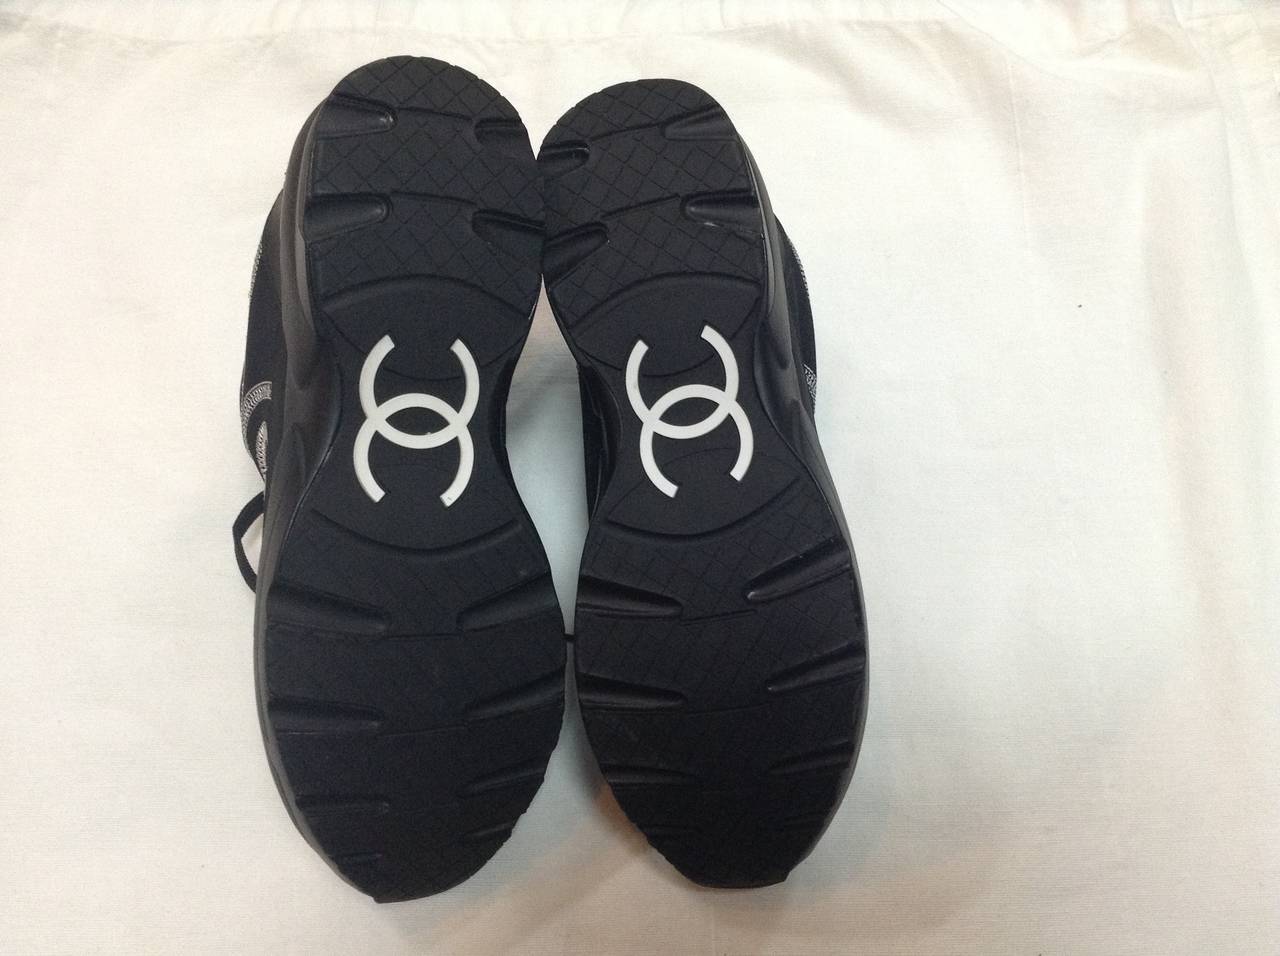 Current season Chanel Neoprene women's sneakers. Comes as is without box or dust bag.

Only worn twice.

Neoprene material

size 7/7.5